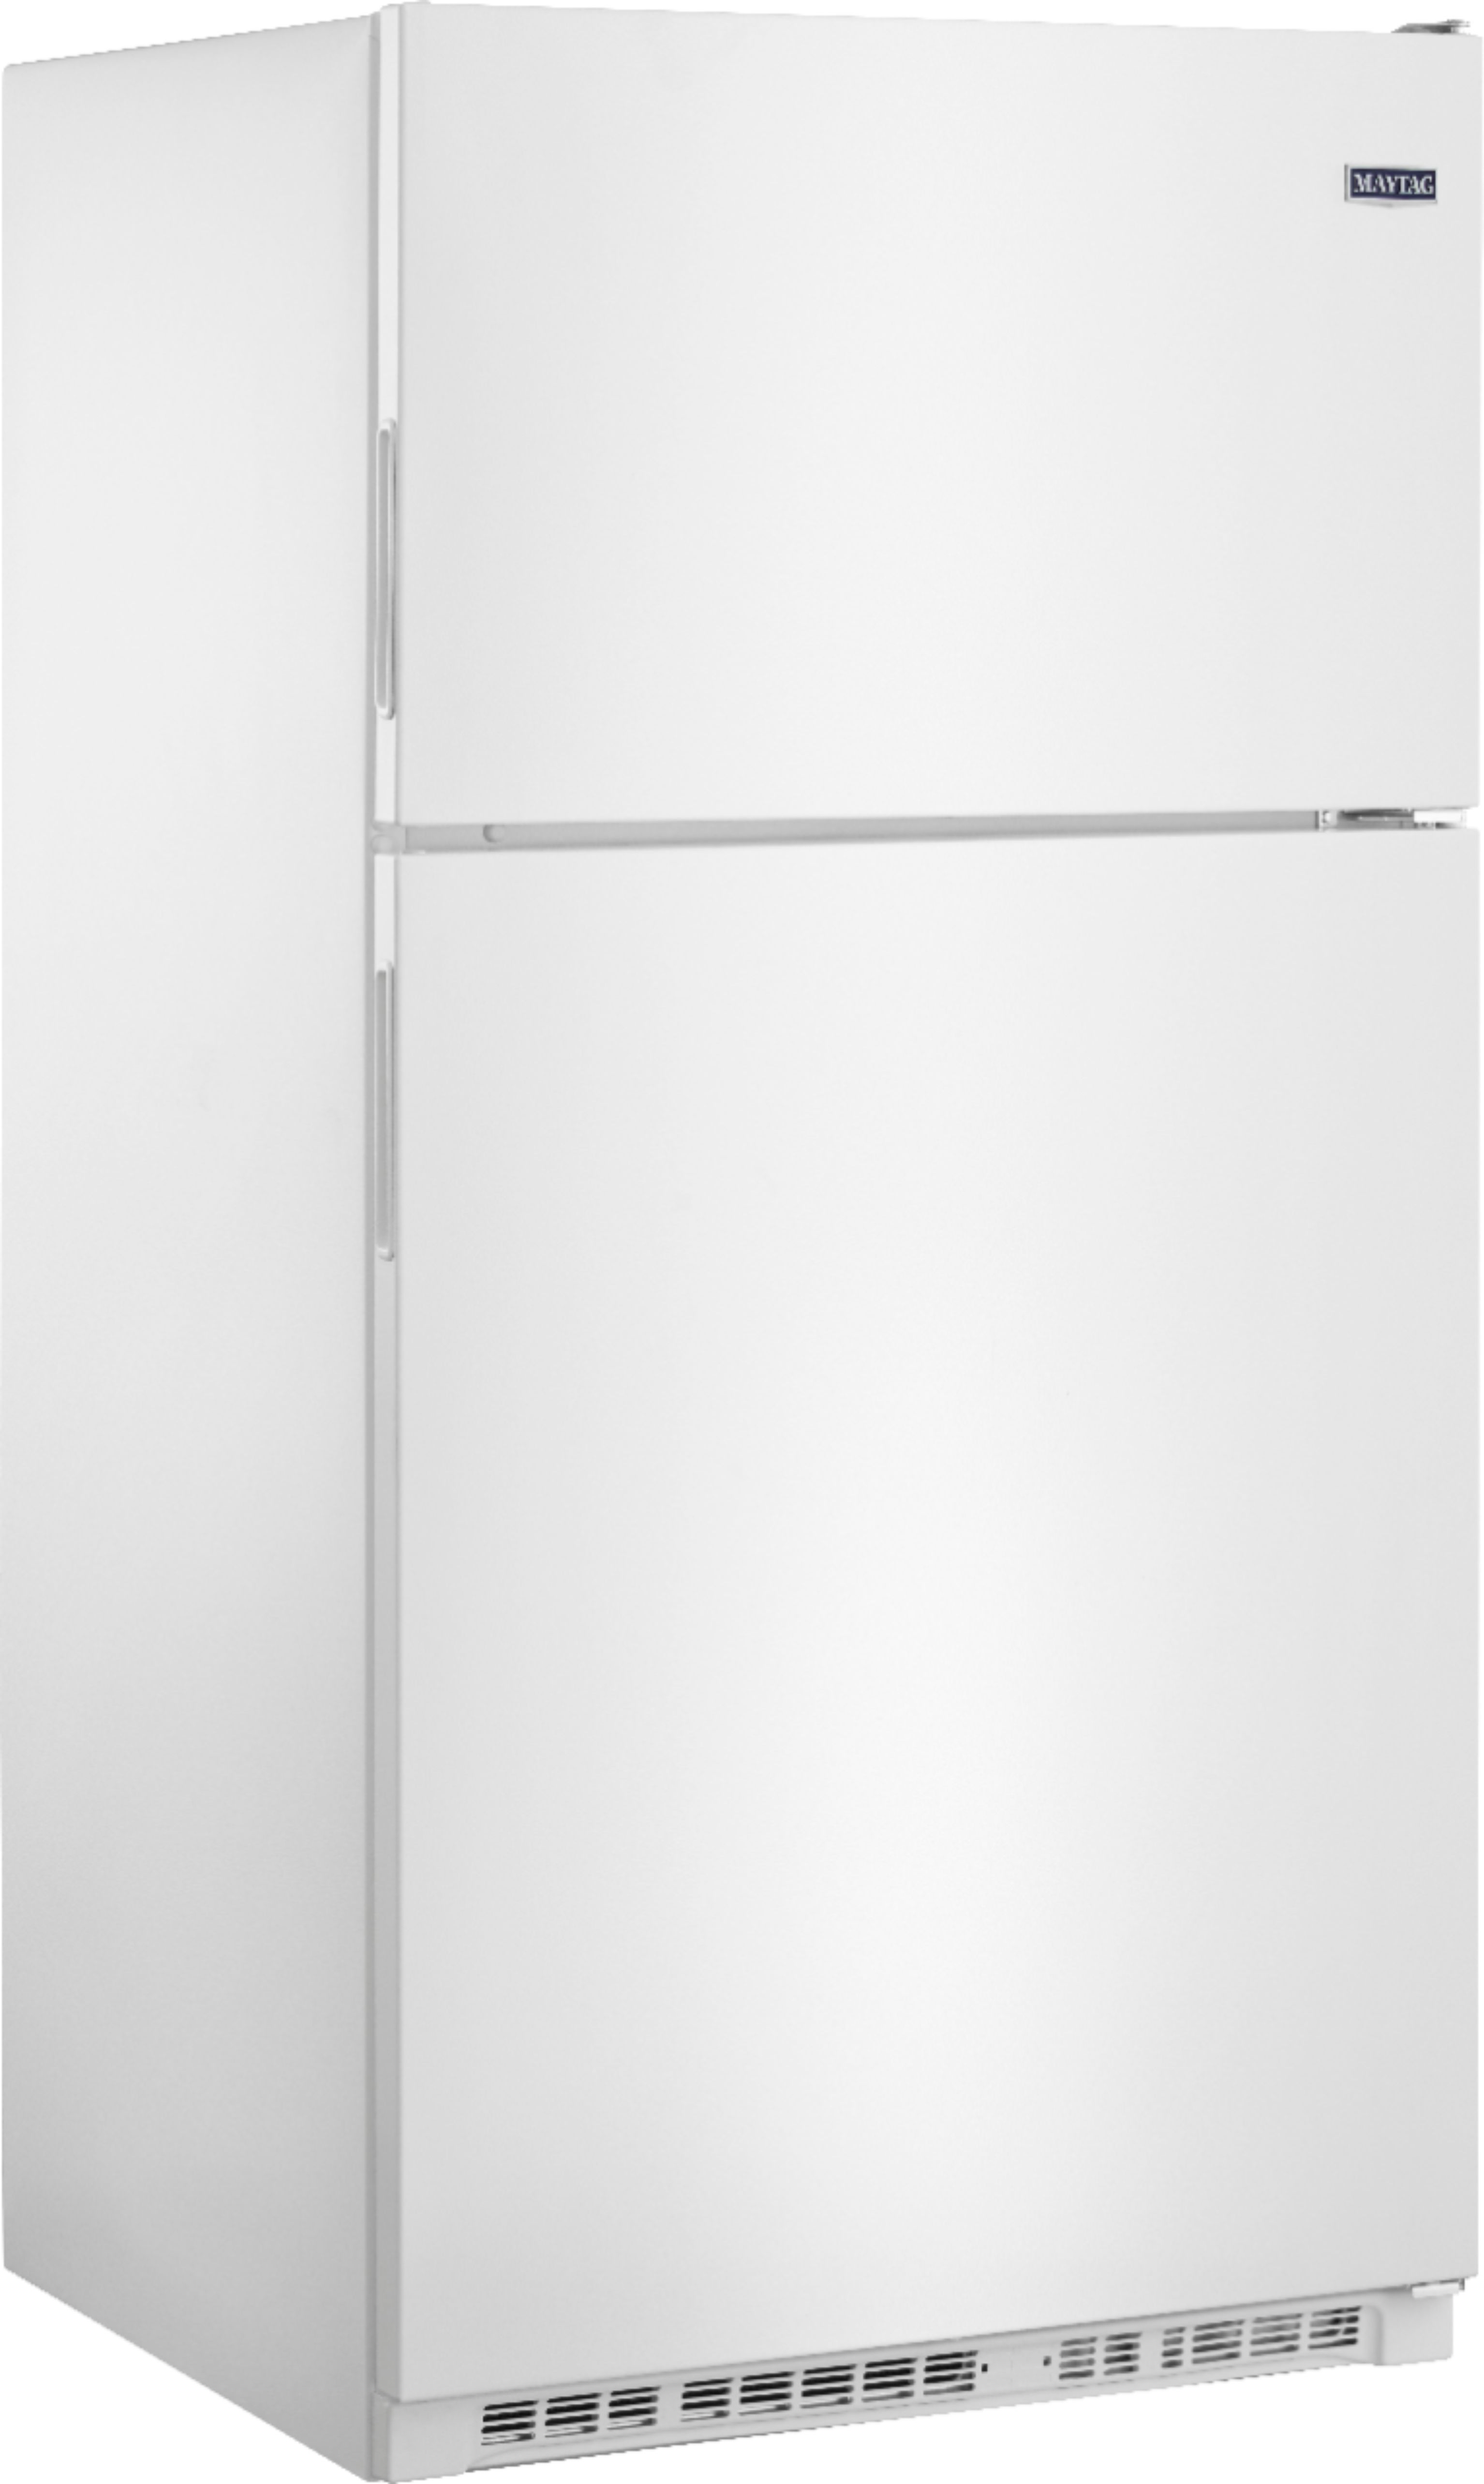 Angle View: Maytag - 20.5 Cu. Ft. Top-Freezer Refrigerator - Monochromatic stainless steel